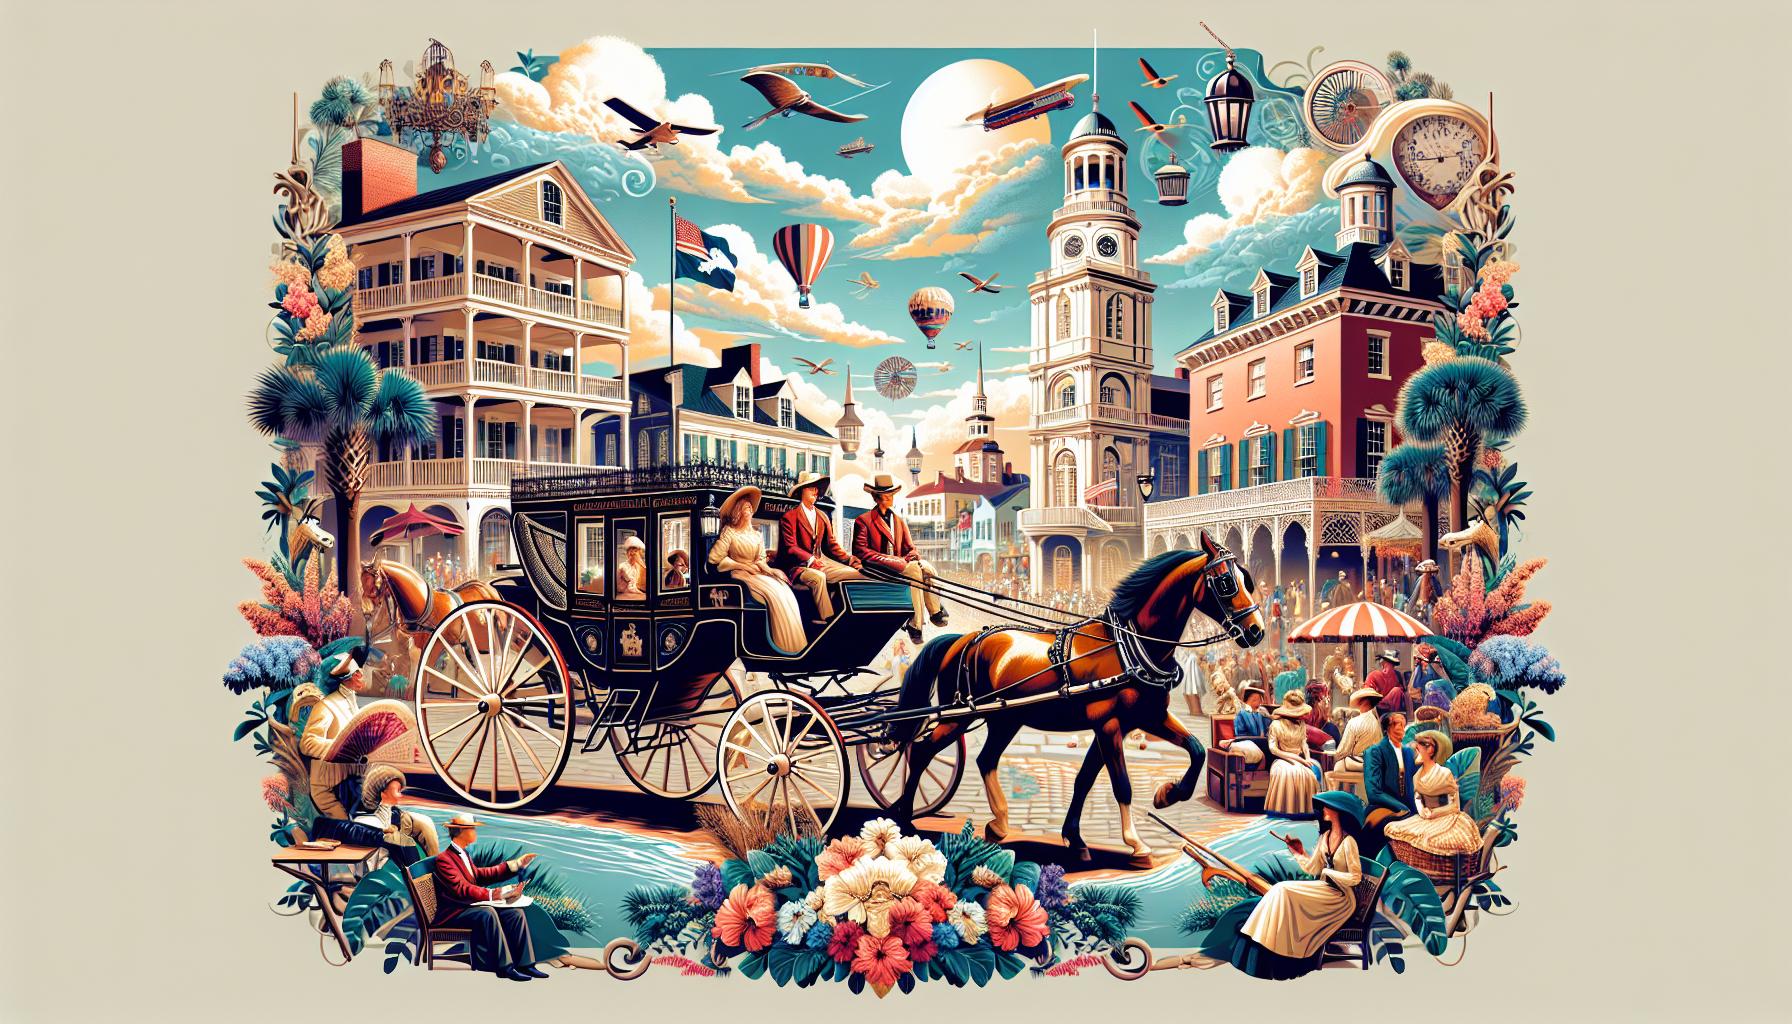 Explore Charm with Groupon Charleston Carriage Tour: An Unforgettable Vacation